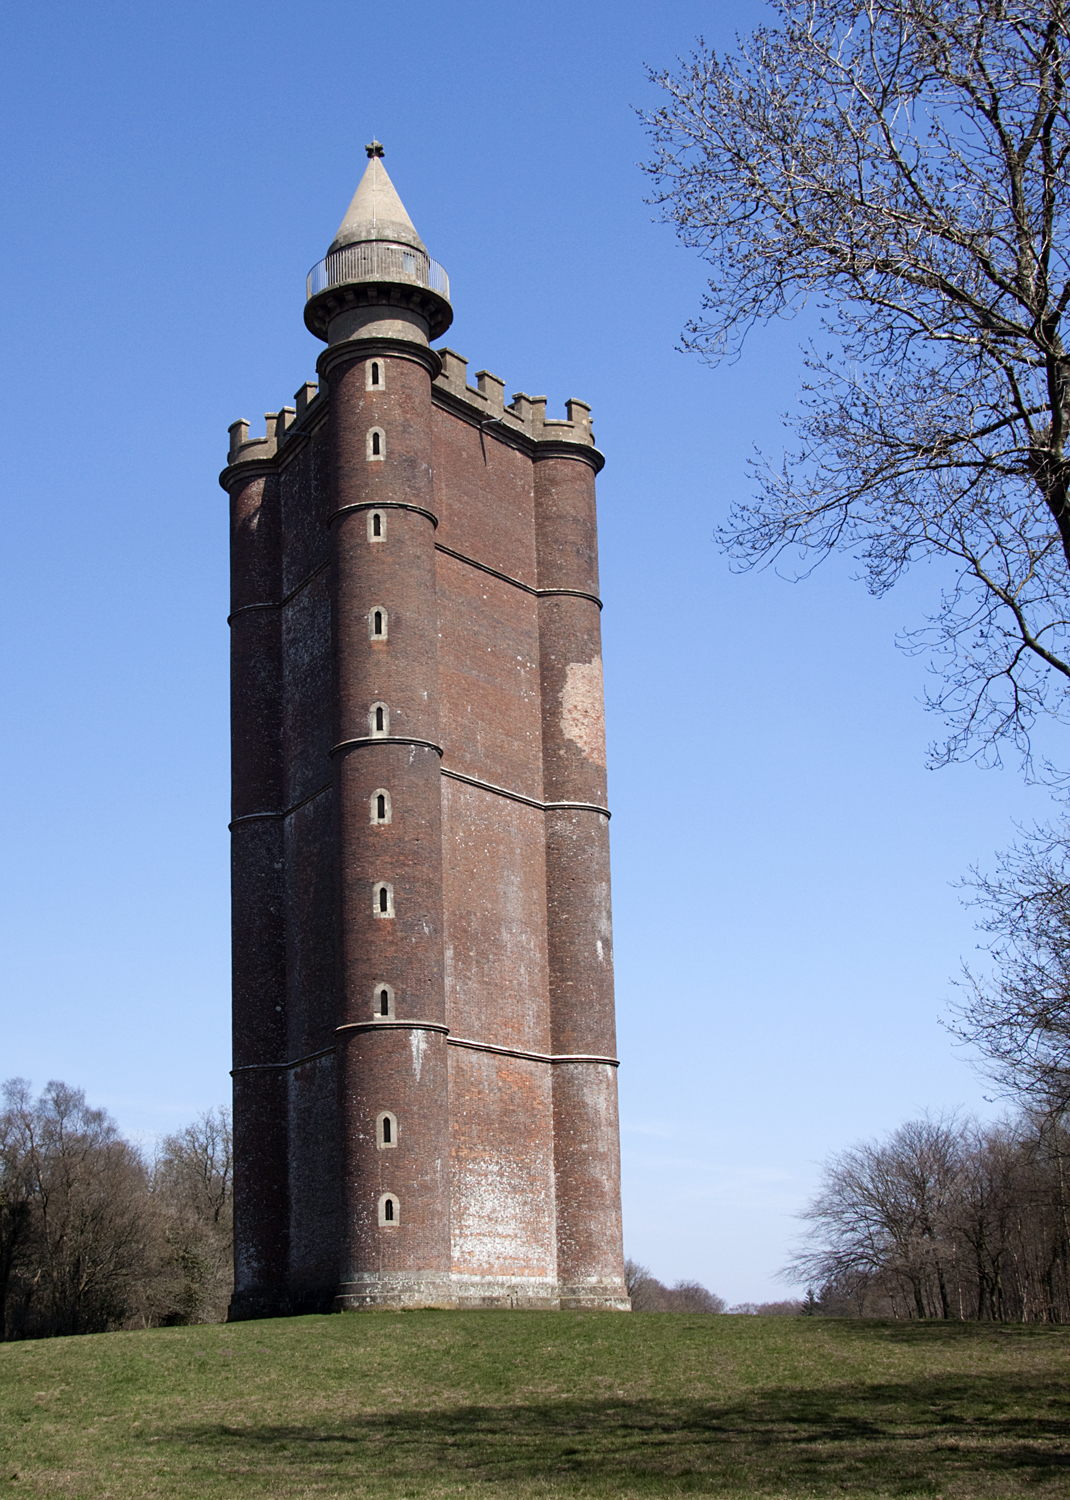 a tower is shown from the side while surrounded by trees